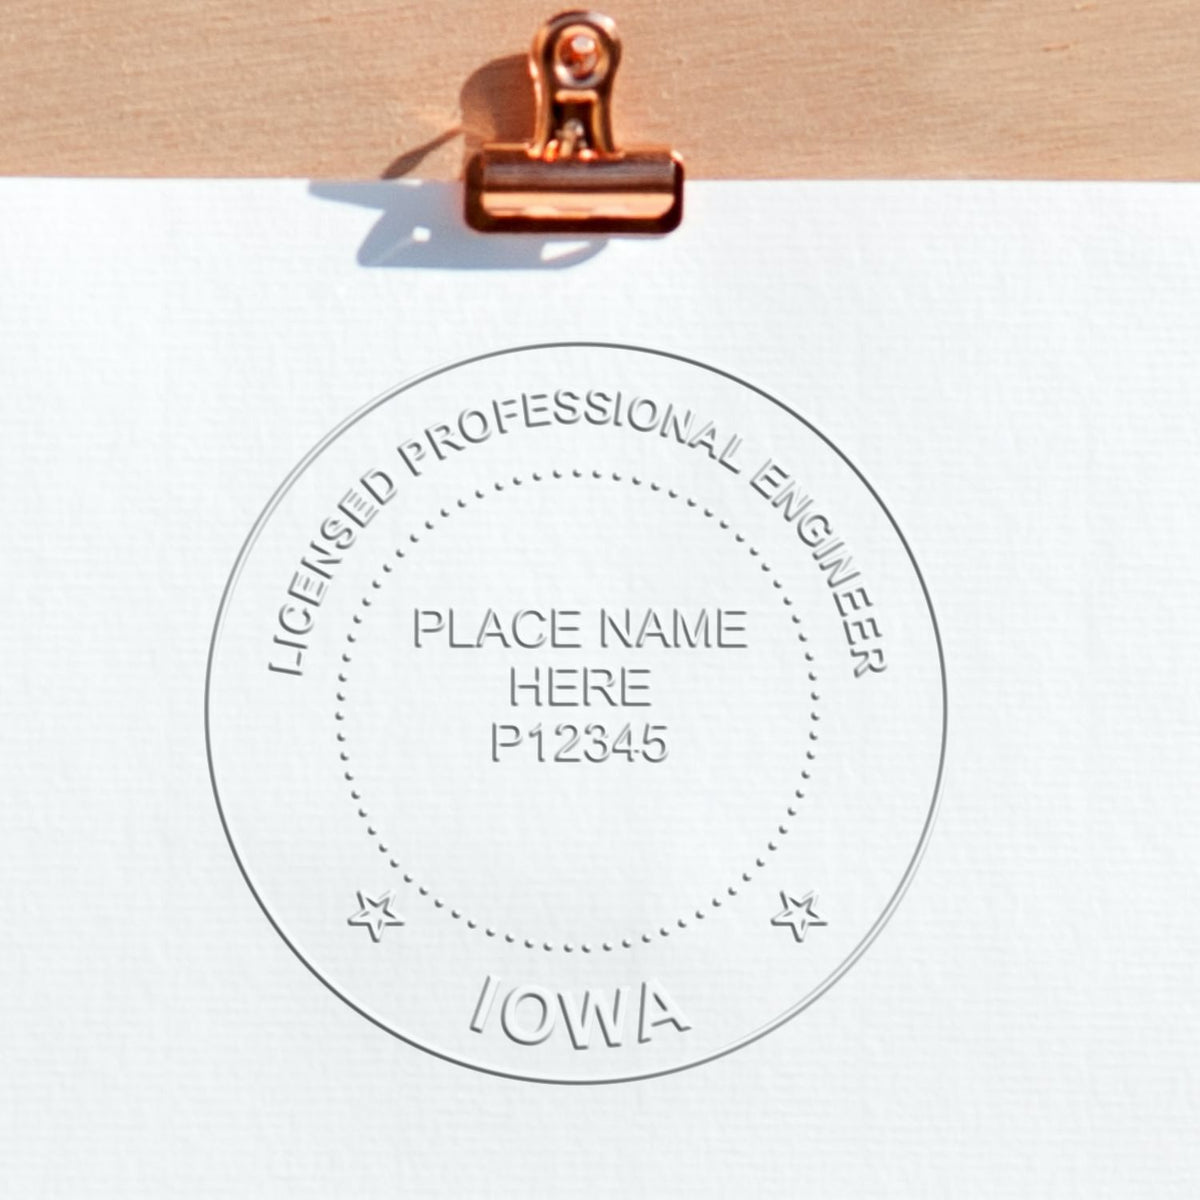 The State of Iowa Extended Long Reach Engineer Seal stamp impression comes to life with a crisp, detailed photo on paper - showcasing true professional quality.